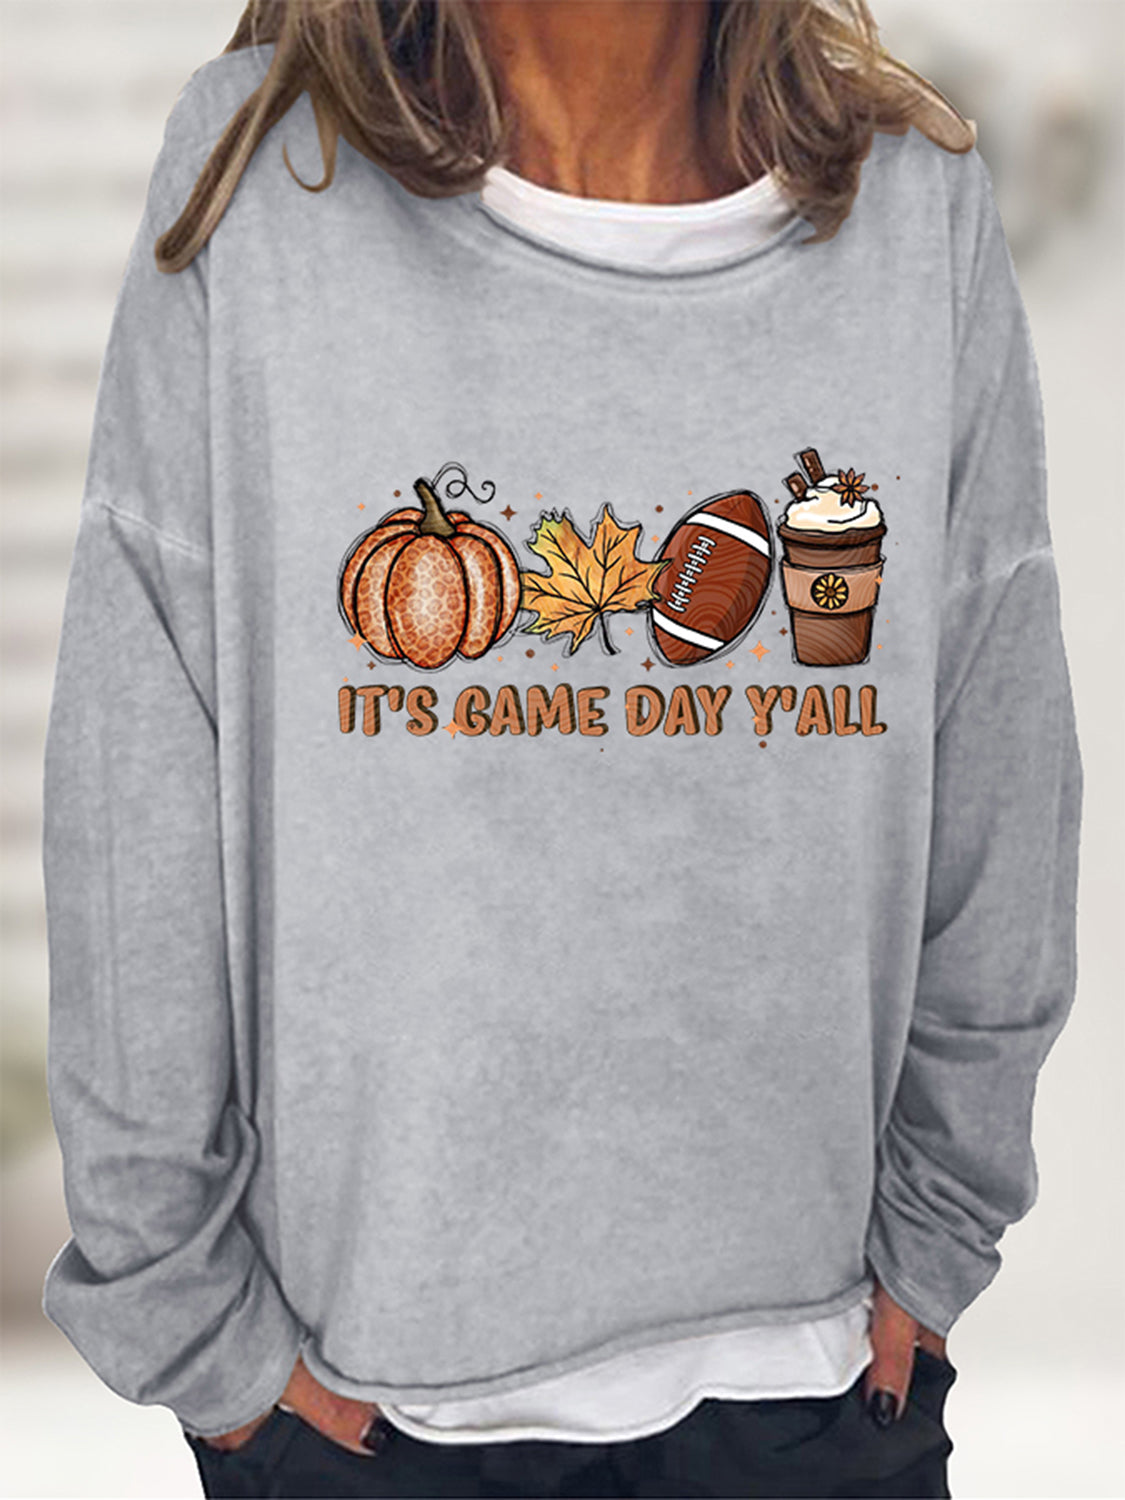 IT’S GAME DAY Y’ALL Graphic Sweatshirt - Gray / S - T-Shirts - Shirts & Tops - 12 - 2024